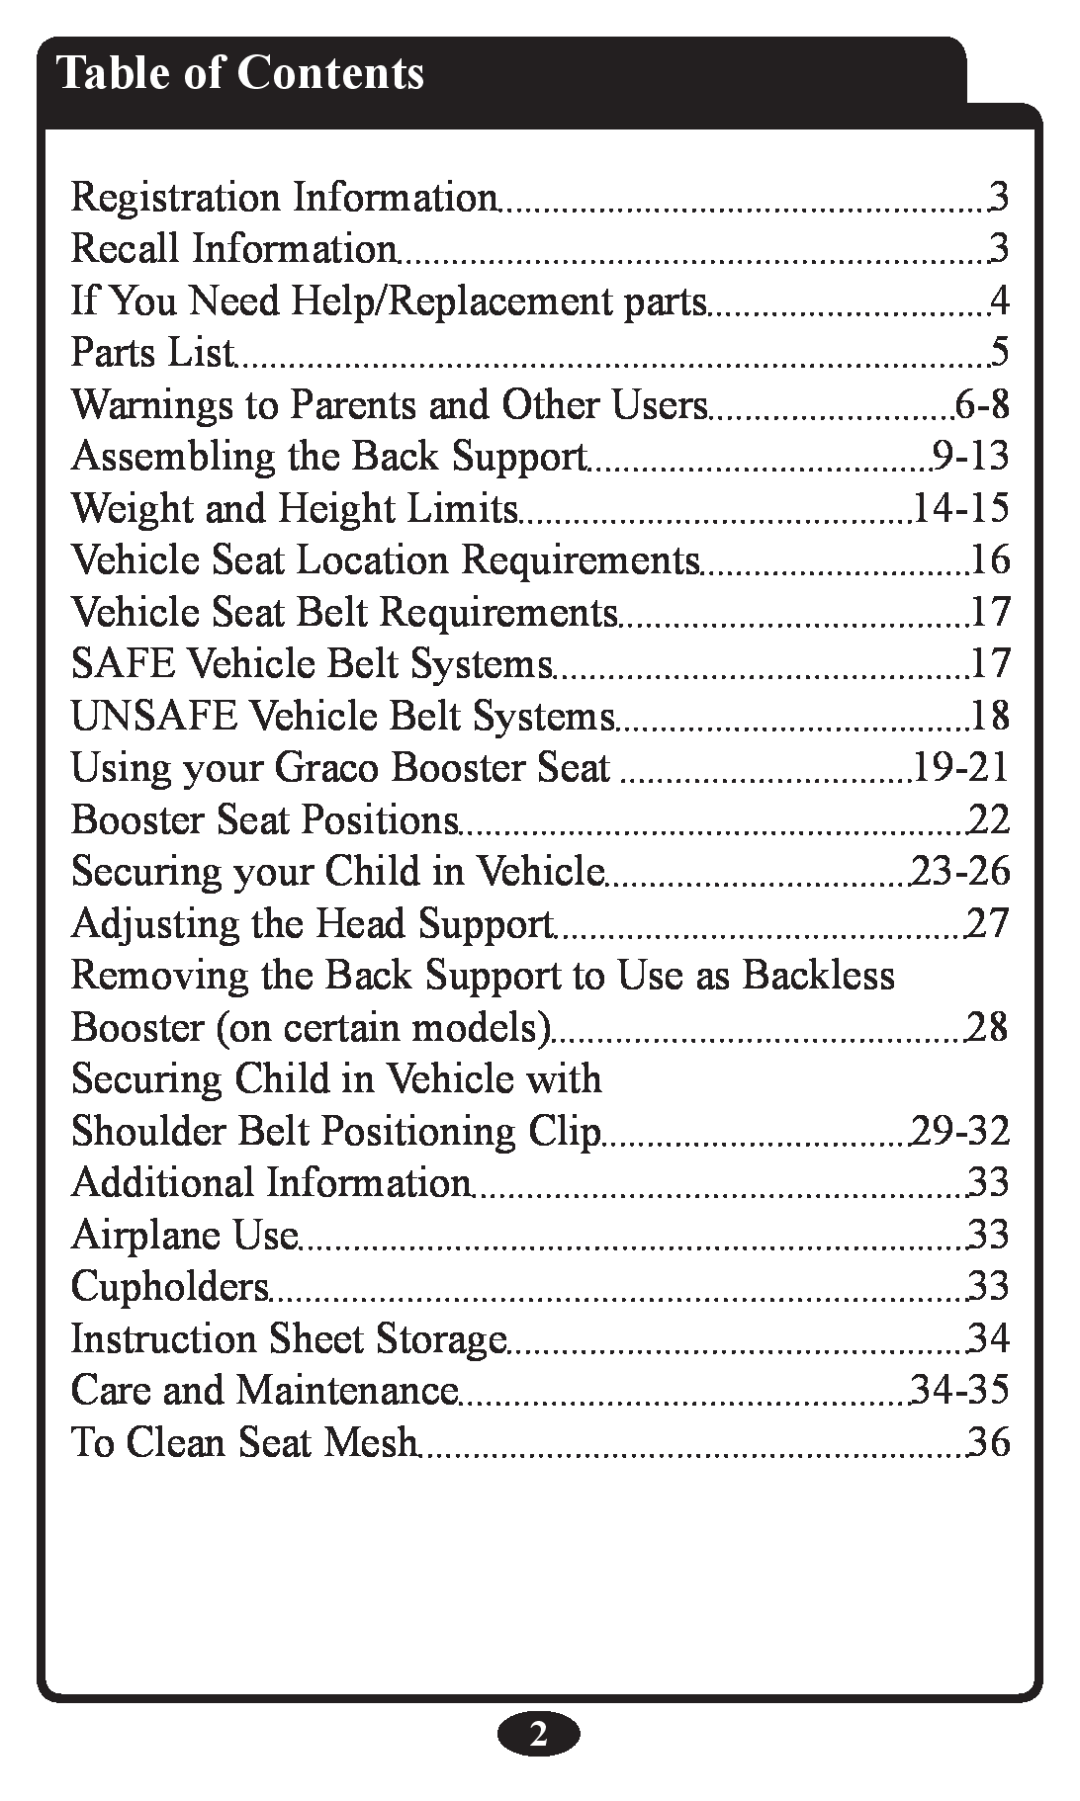 Graco Booster Seat owner manual Table of Contents 